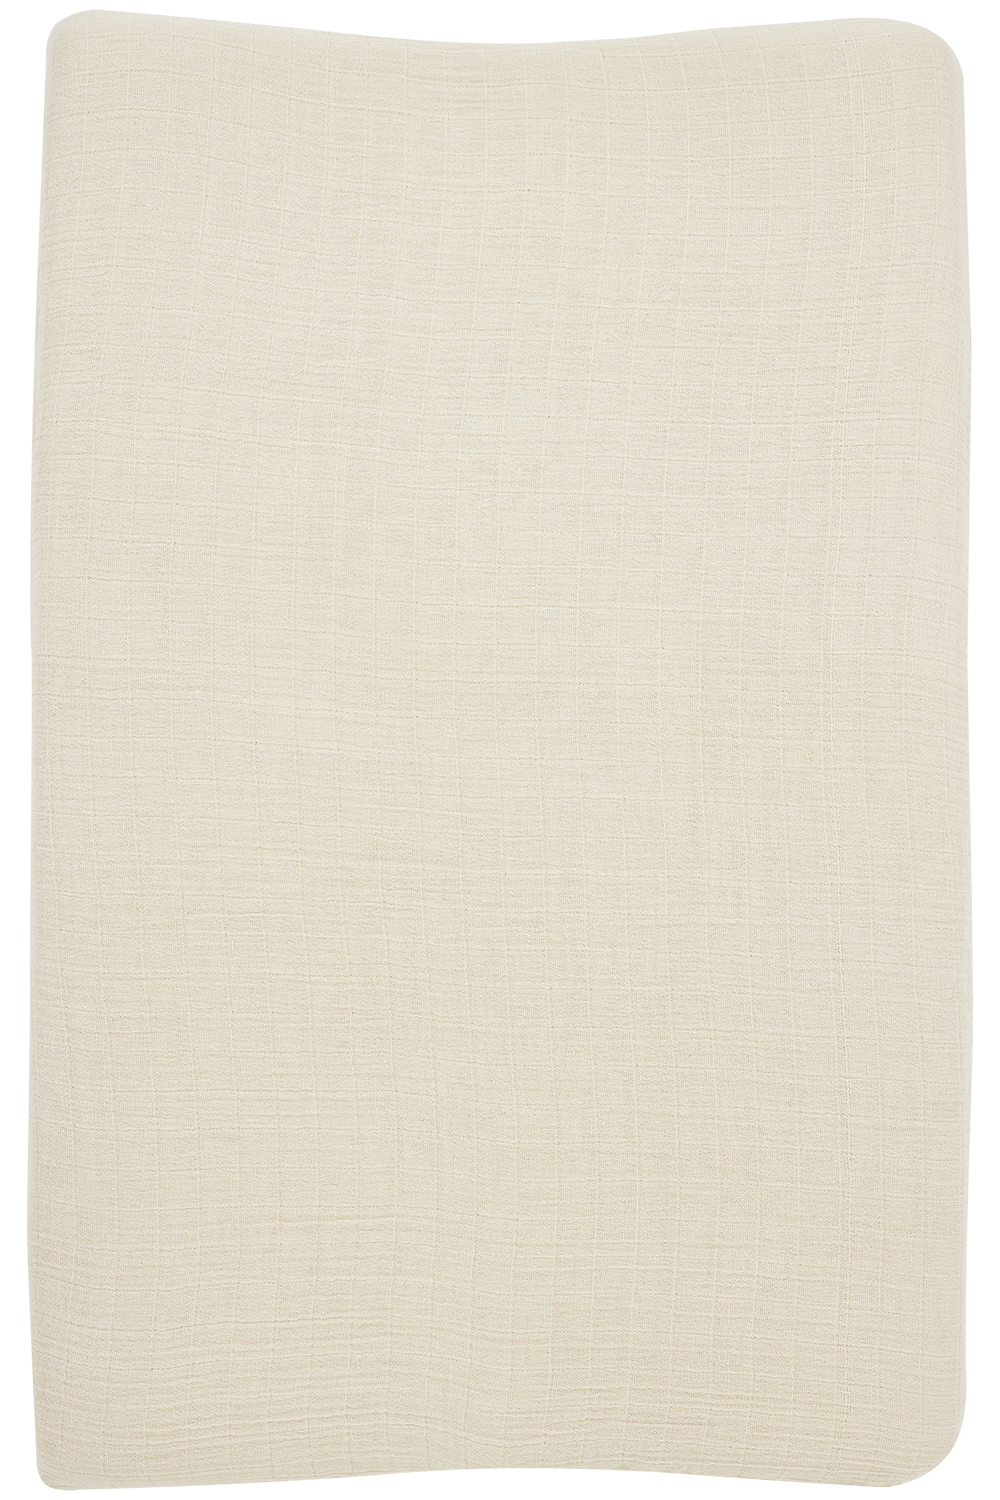 Changing mat cover pre-washed muslin Uni - soft sand - 50x70cm